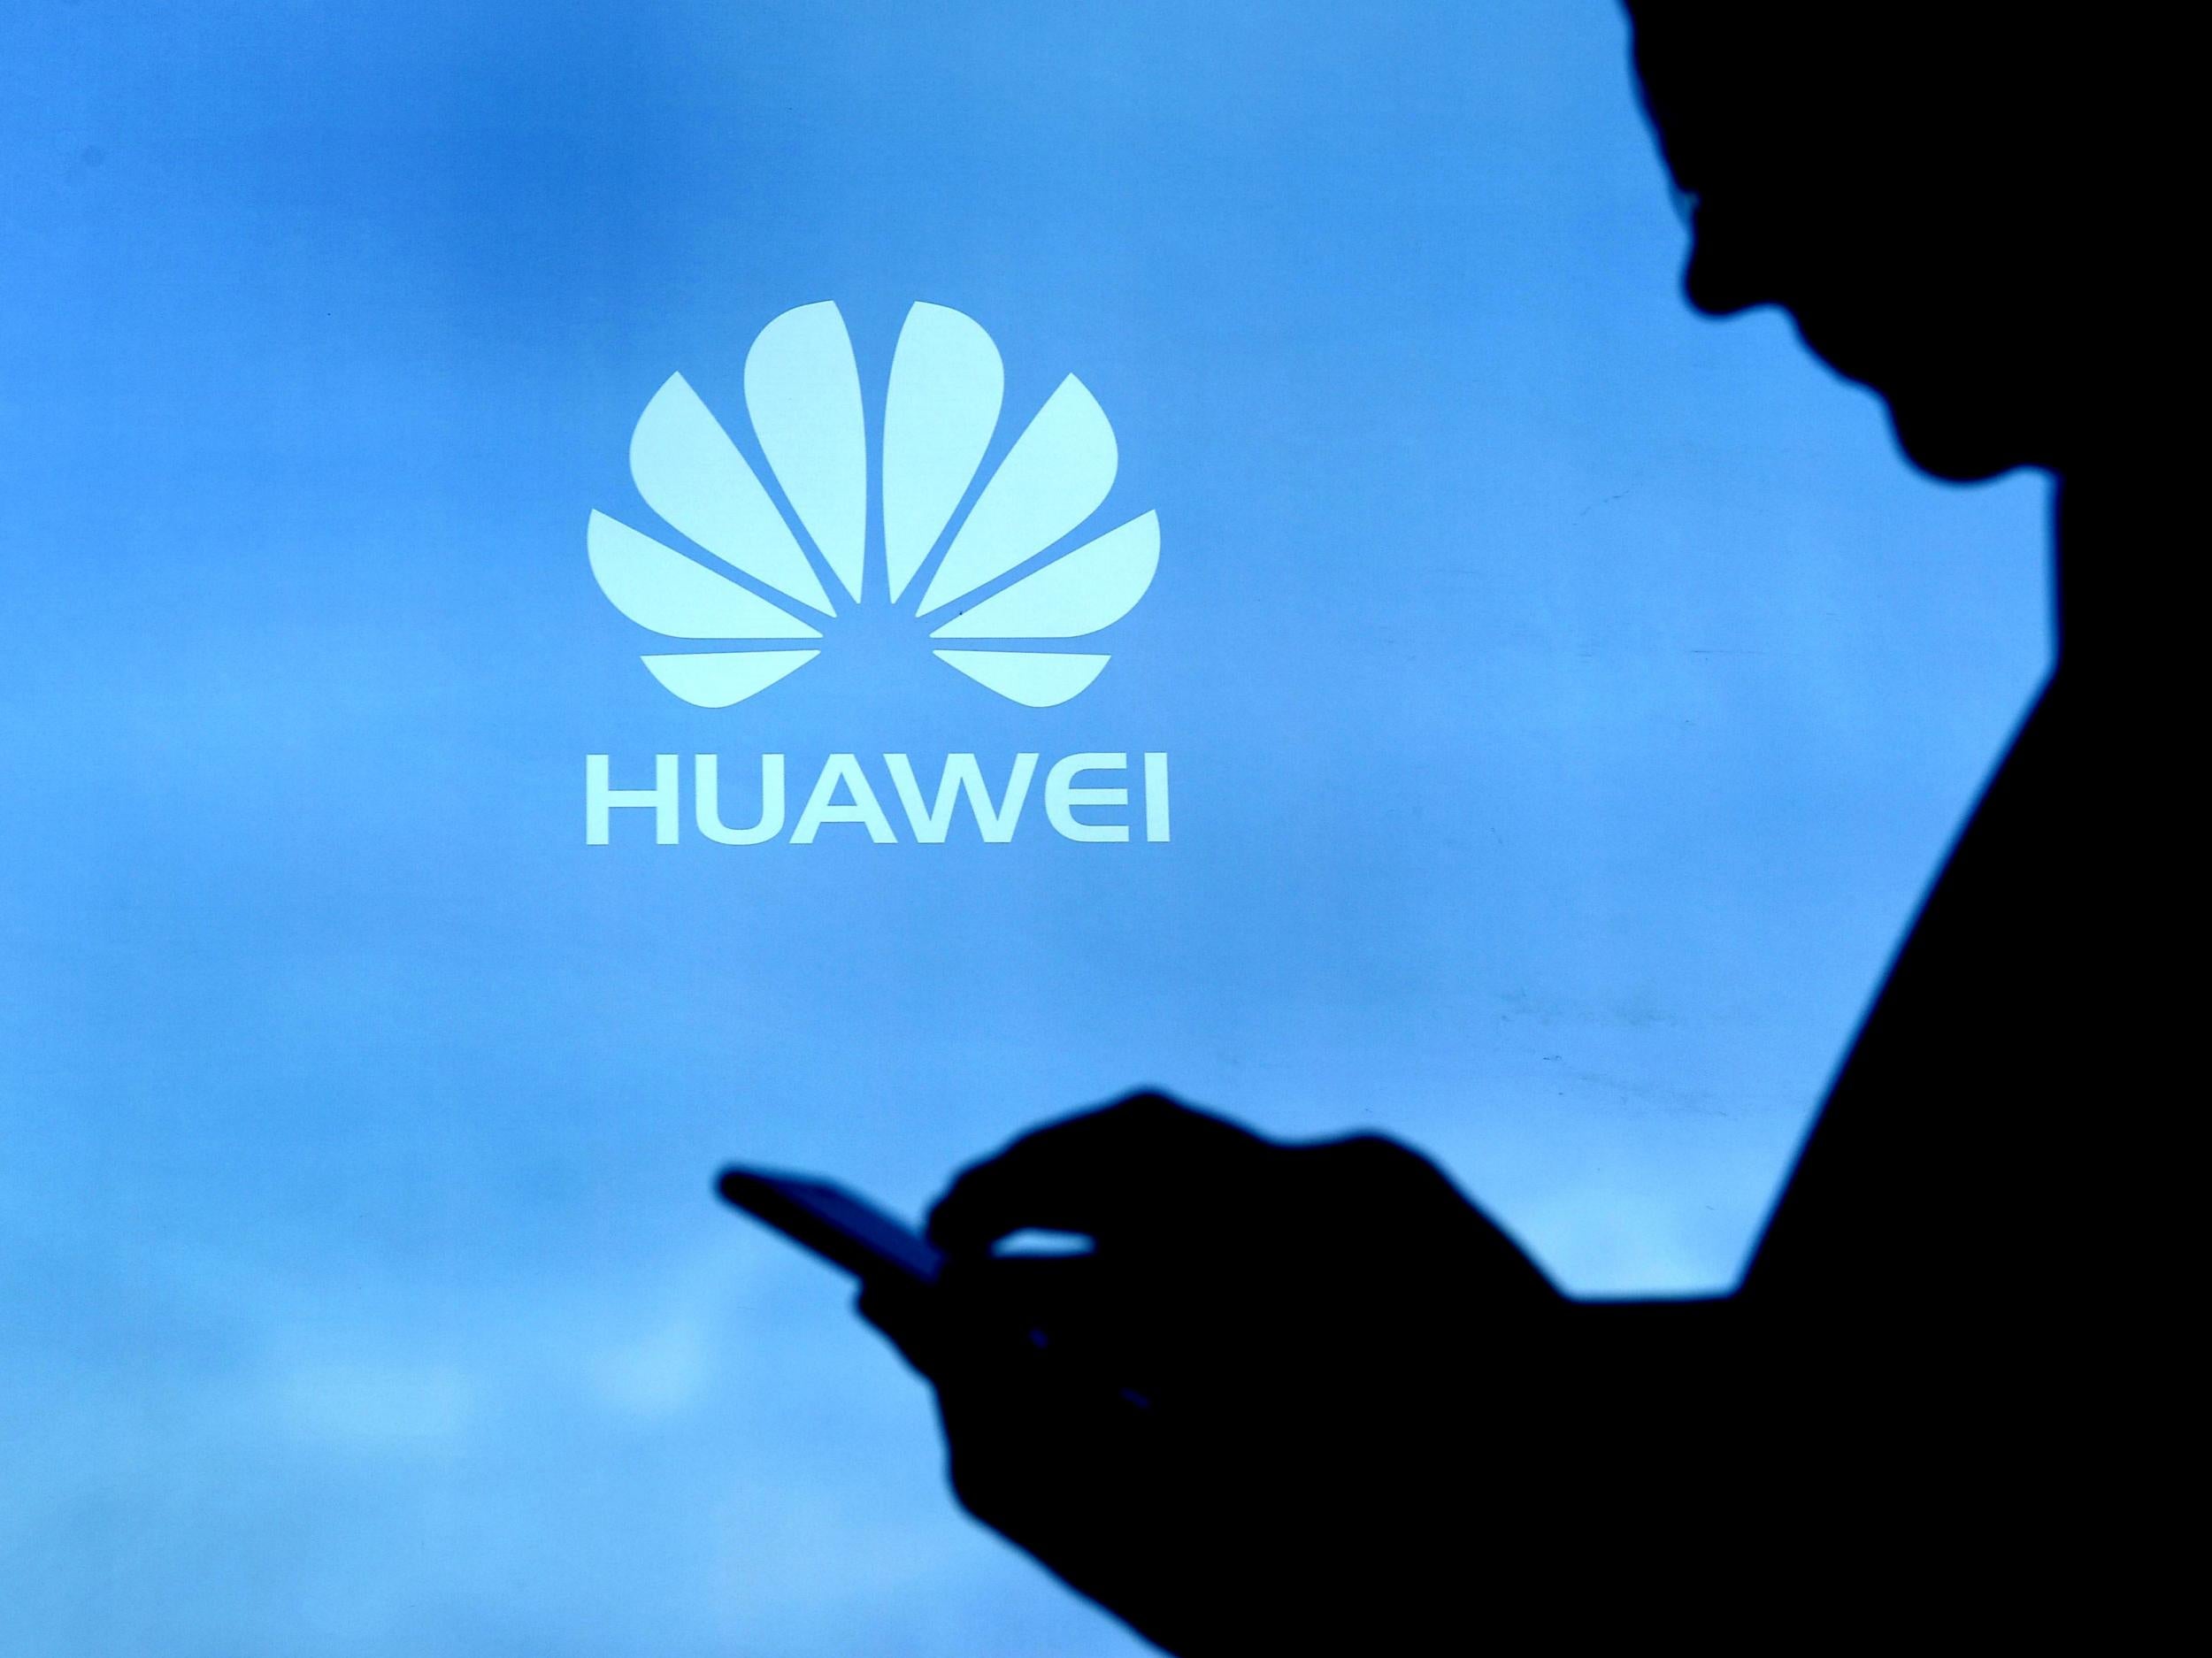 Huawei has gone from copycat to competitor in recent years thanks to a succession of impressive flagship smartphones